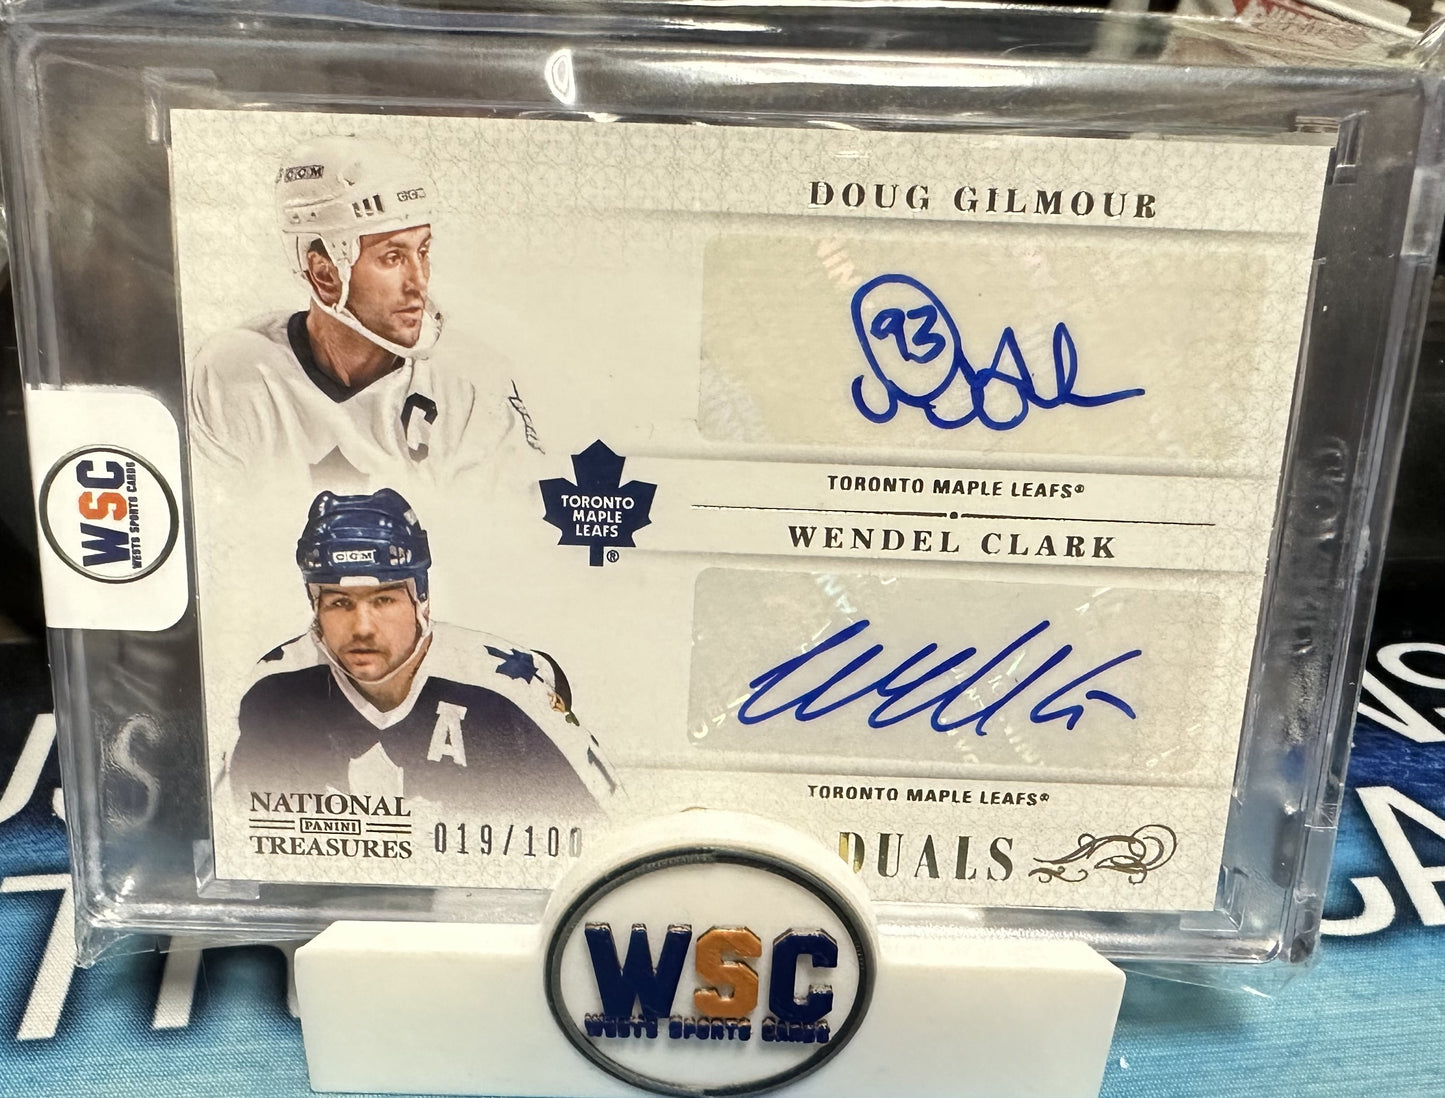 WSC MYSTERY PACKS VOLUME 9: 1 CARD / PACK (1 AUTOGRAPH / PATCH or GRADED CARD IN EVERY PACK)